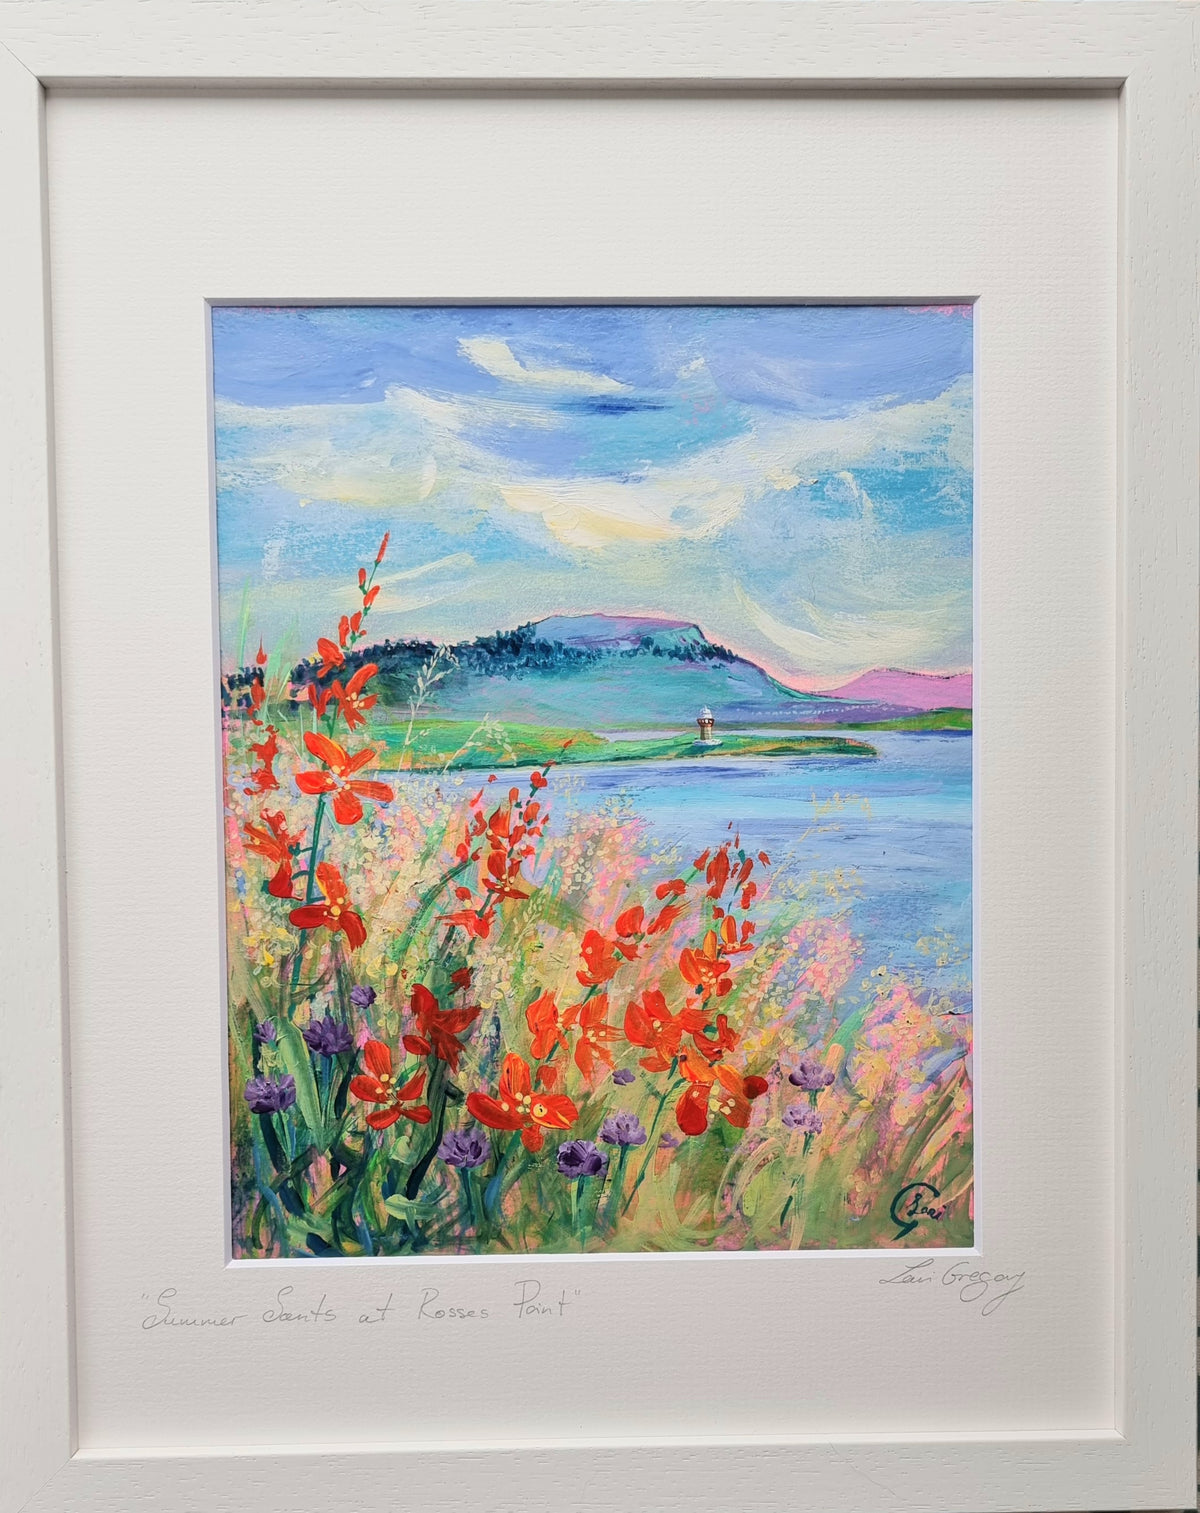 " Summer scents at Rosses Point"